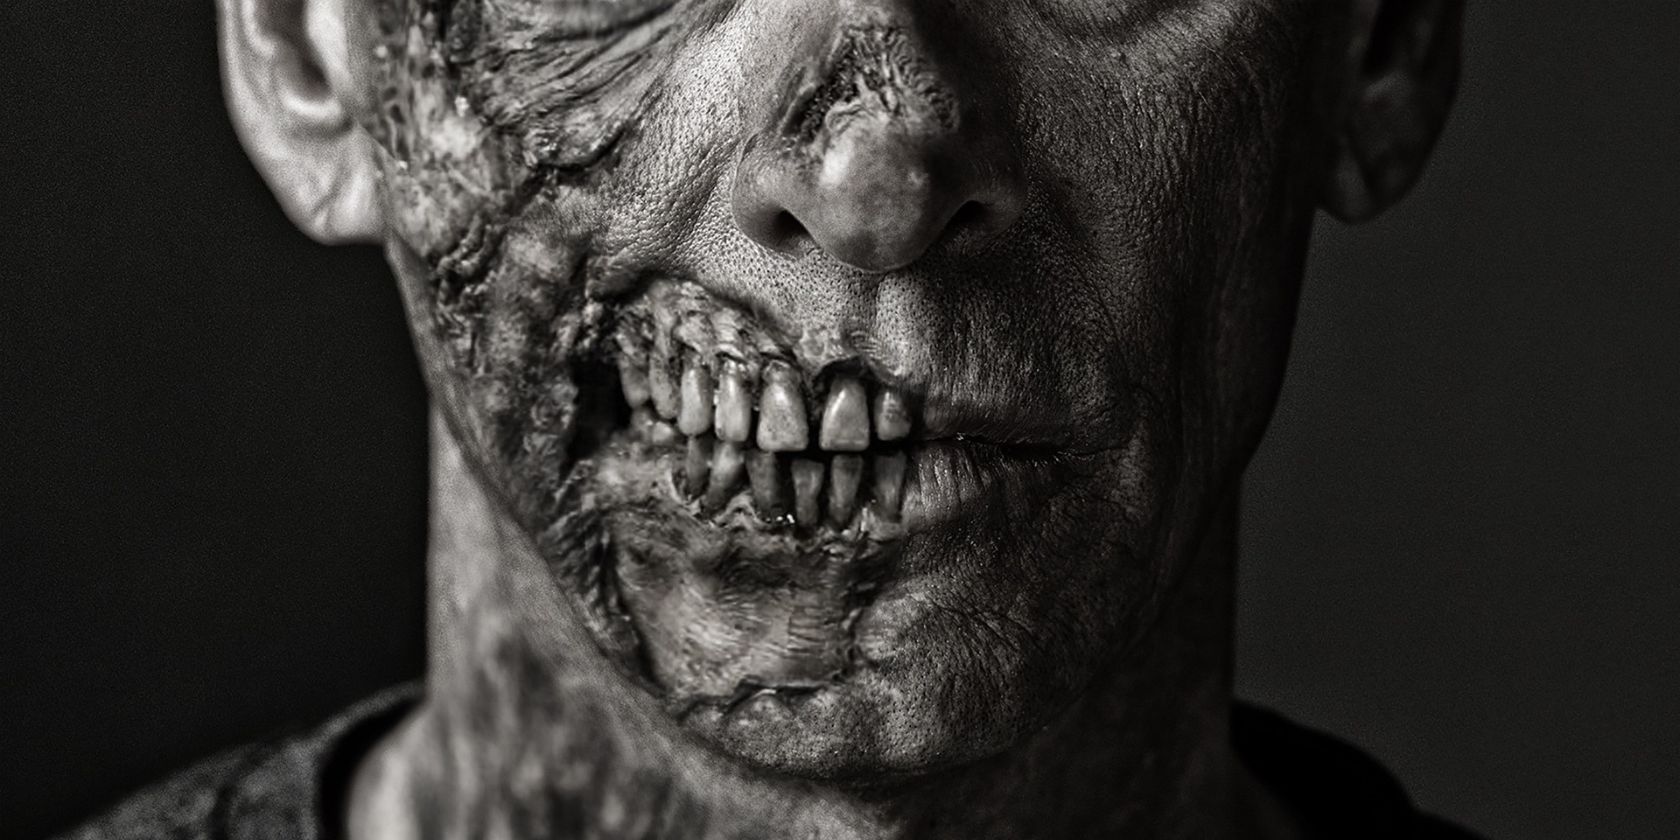 A close up of a zombified face